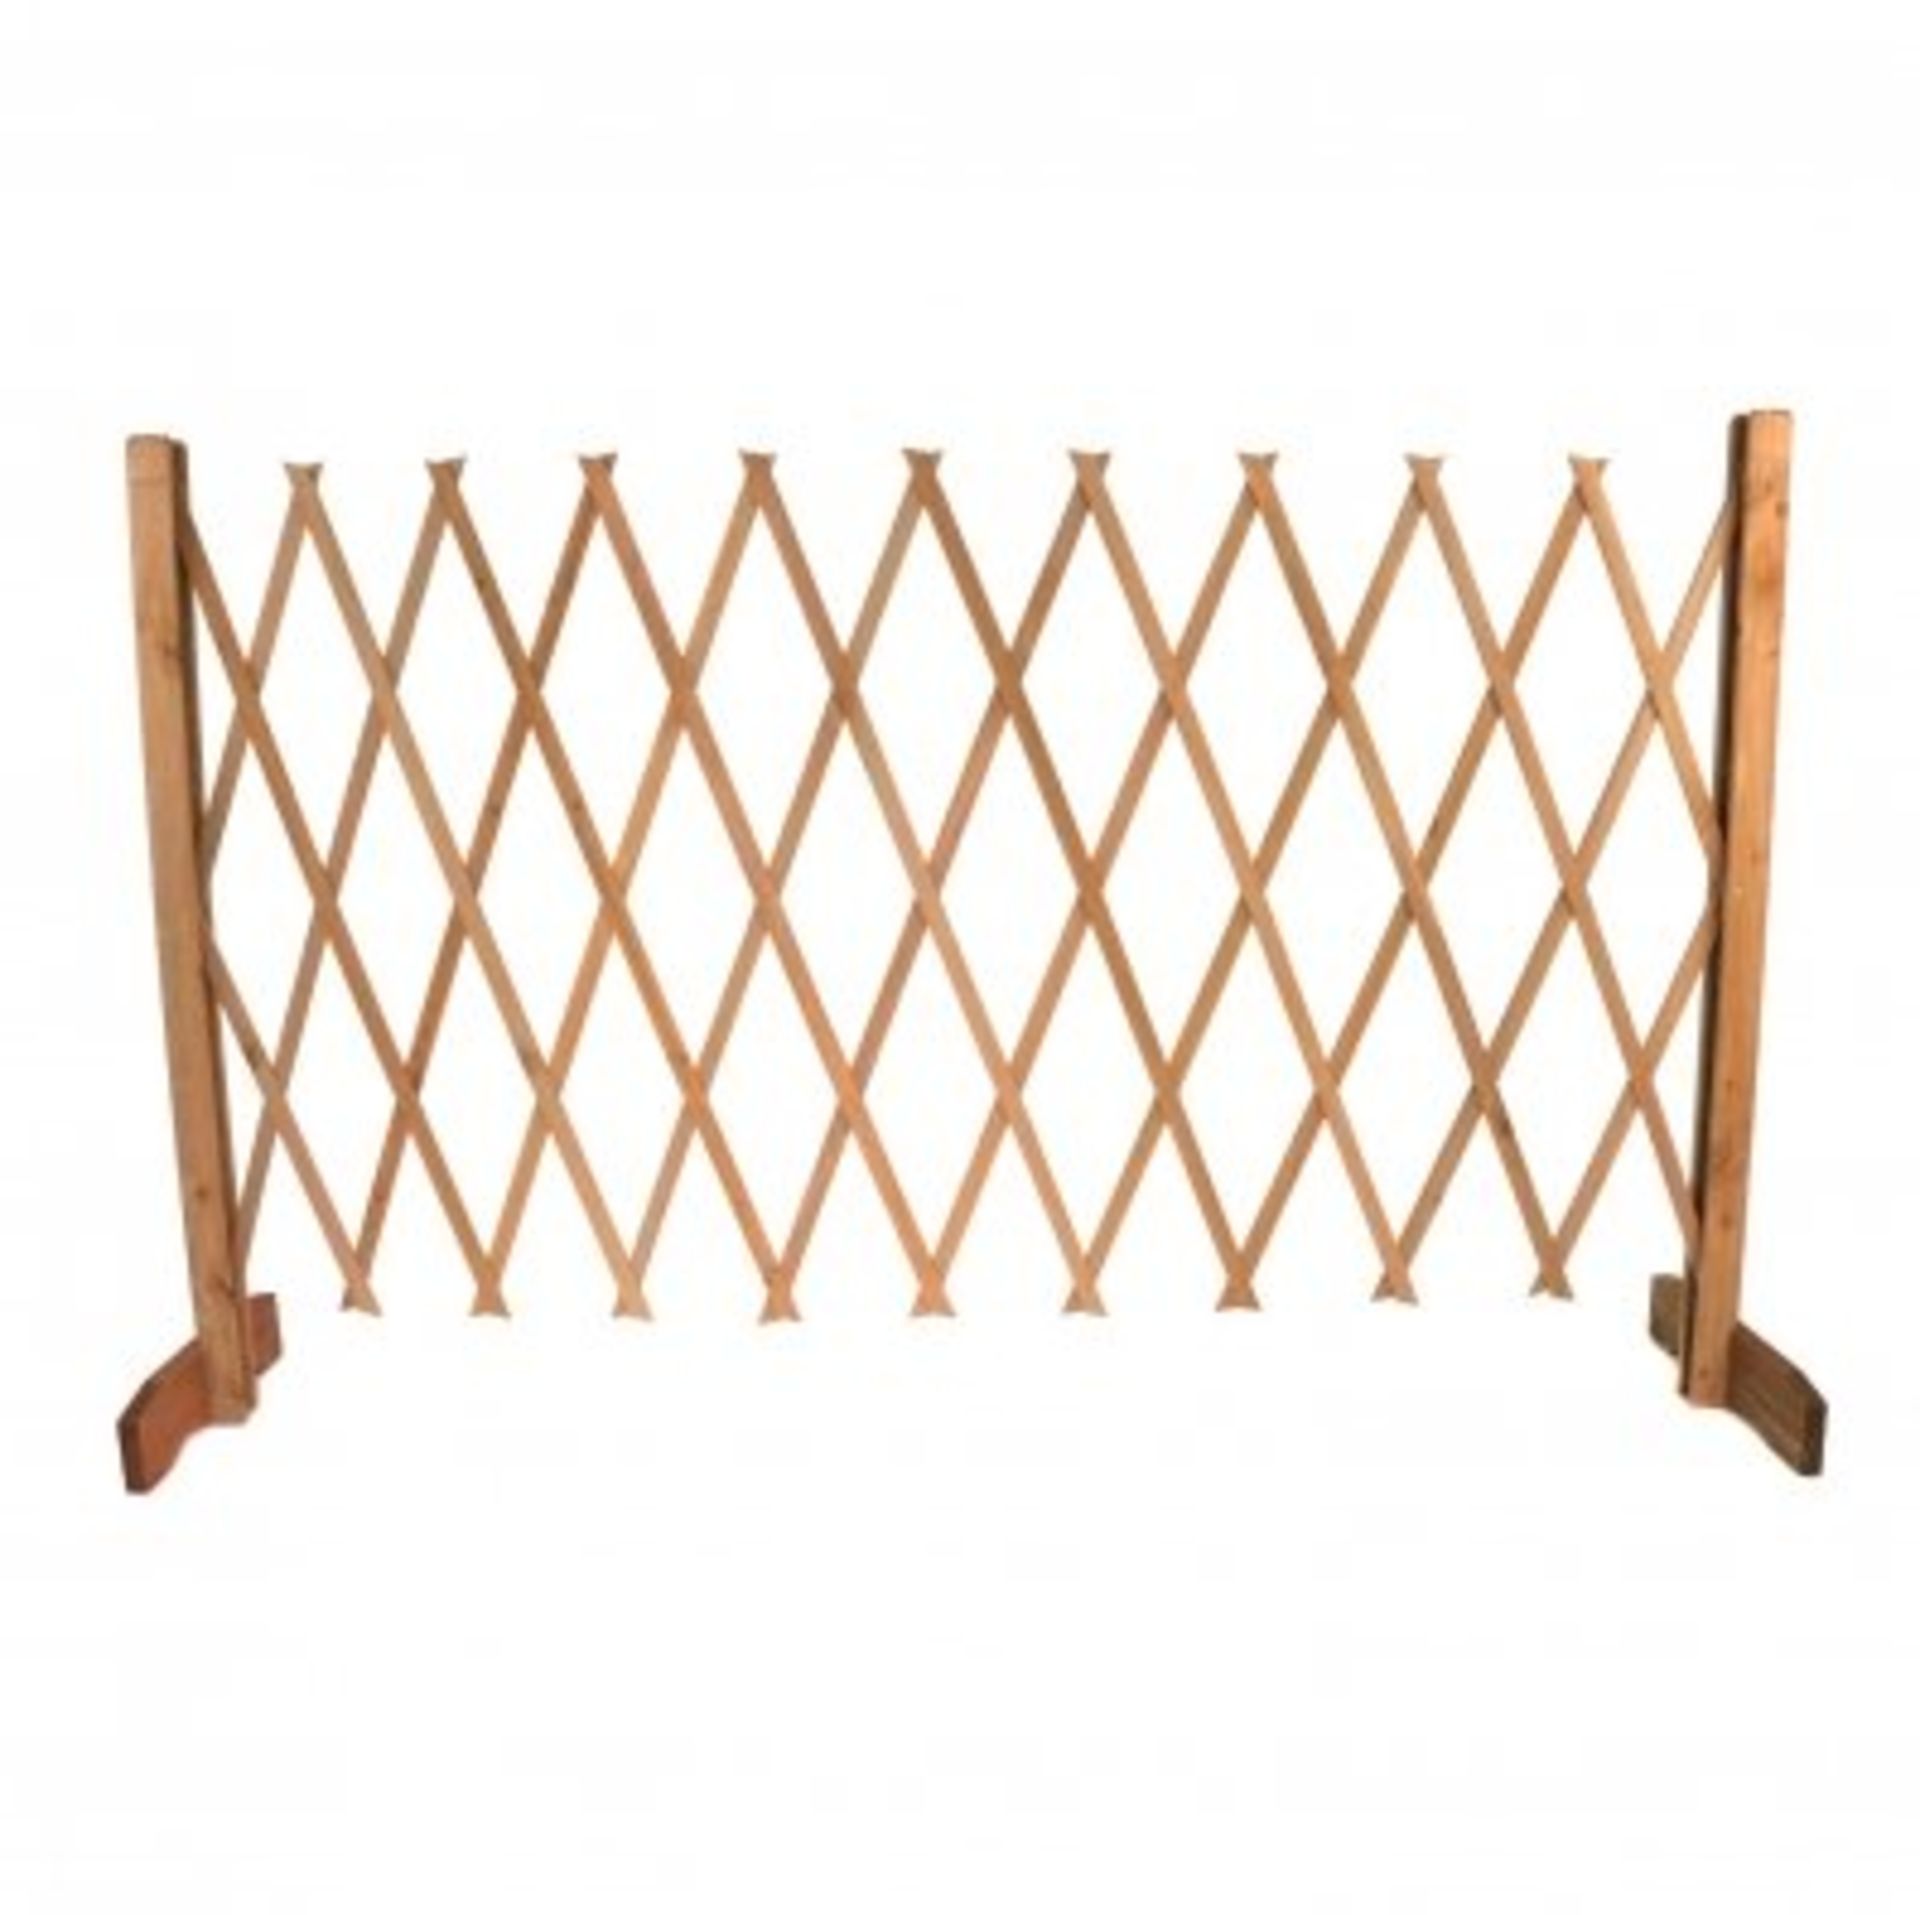 (KK141) Arched Expanding Freestanding Wooden Trellis Fence Garden Screen Add some style to...